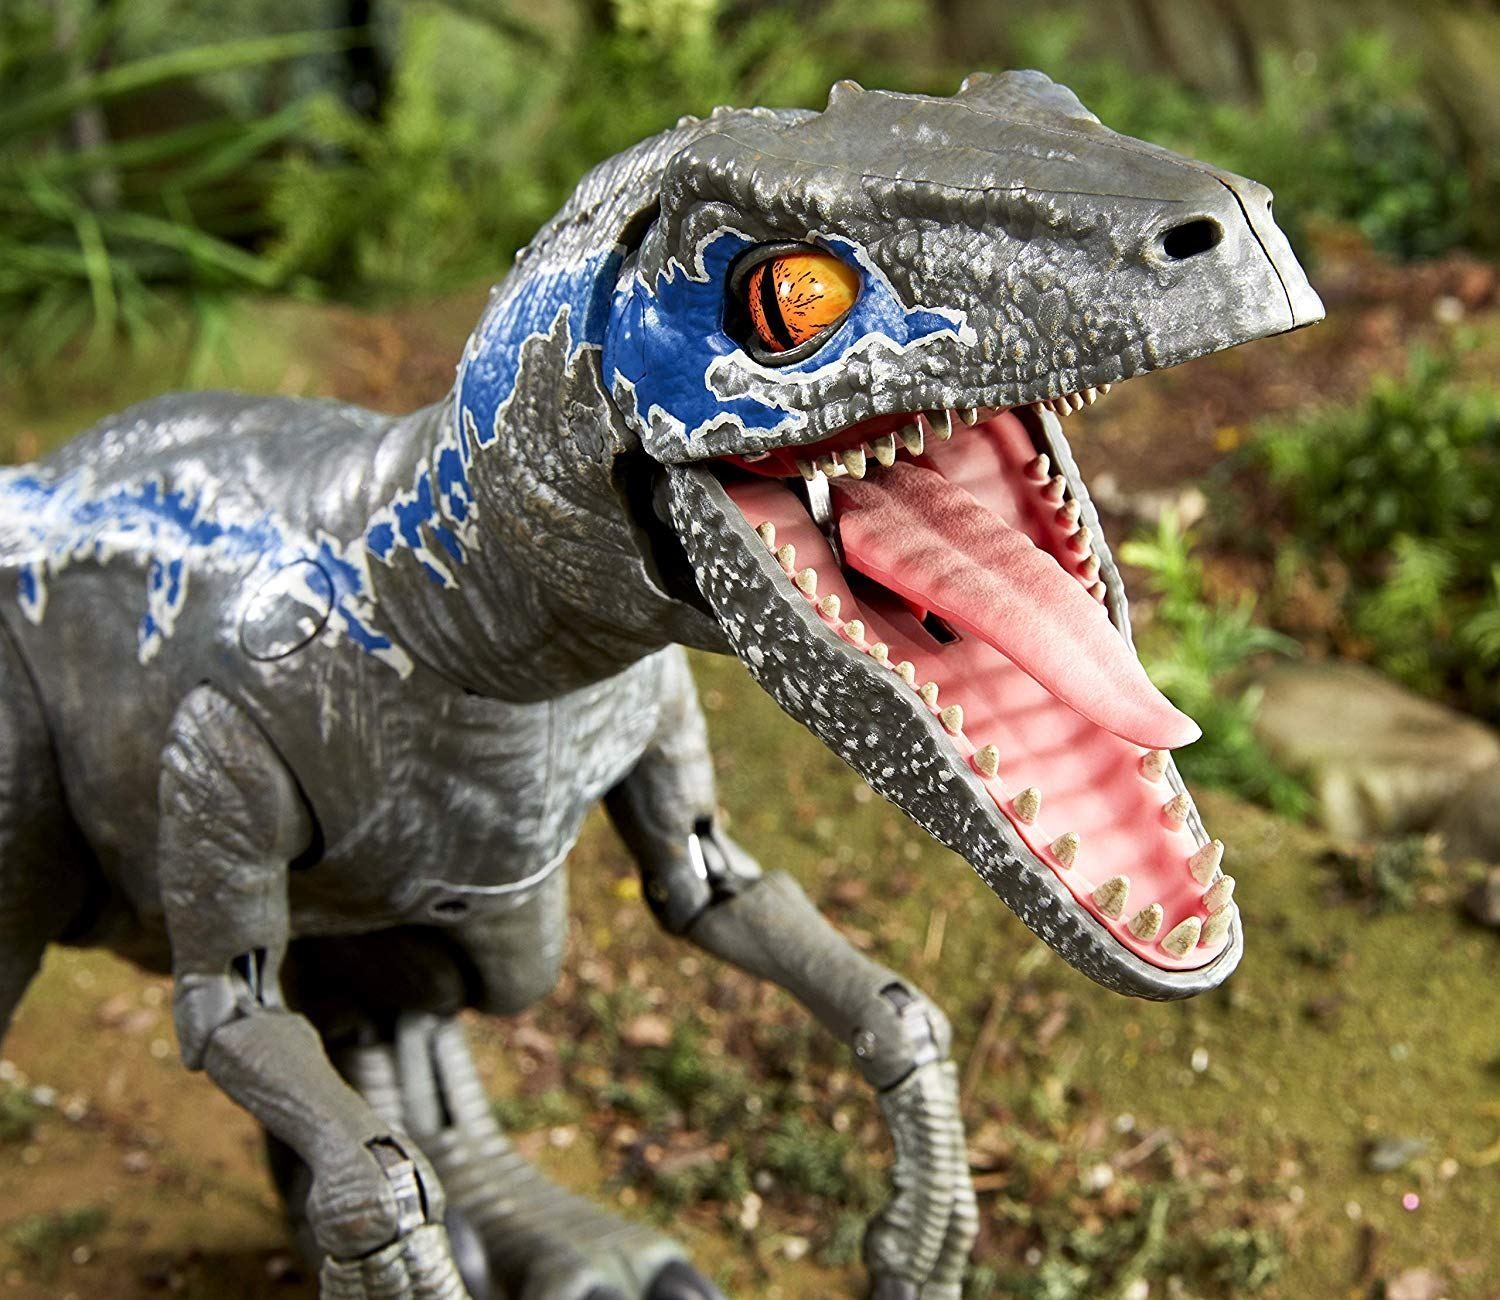 Ultimate Jurassic World Toy Revealed, a Remote Control Raptor You